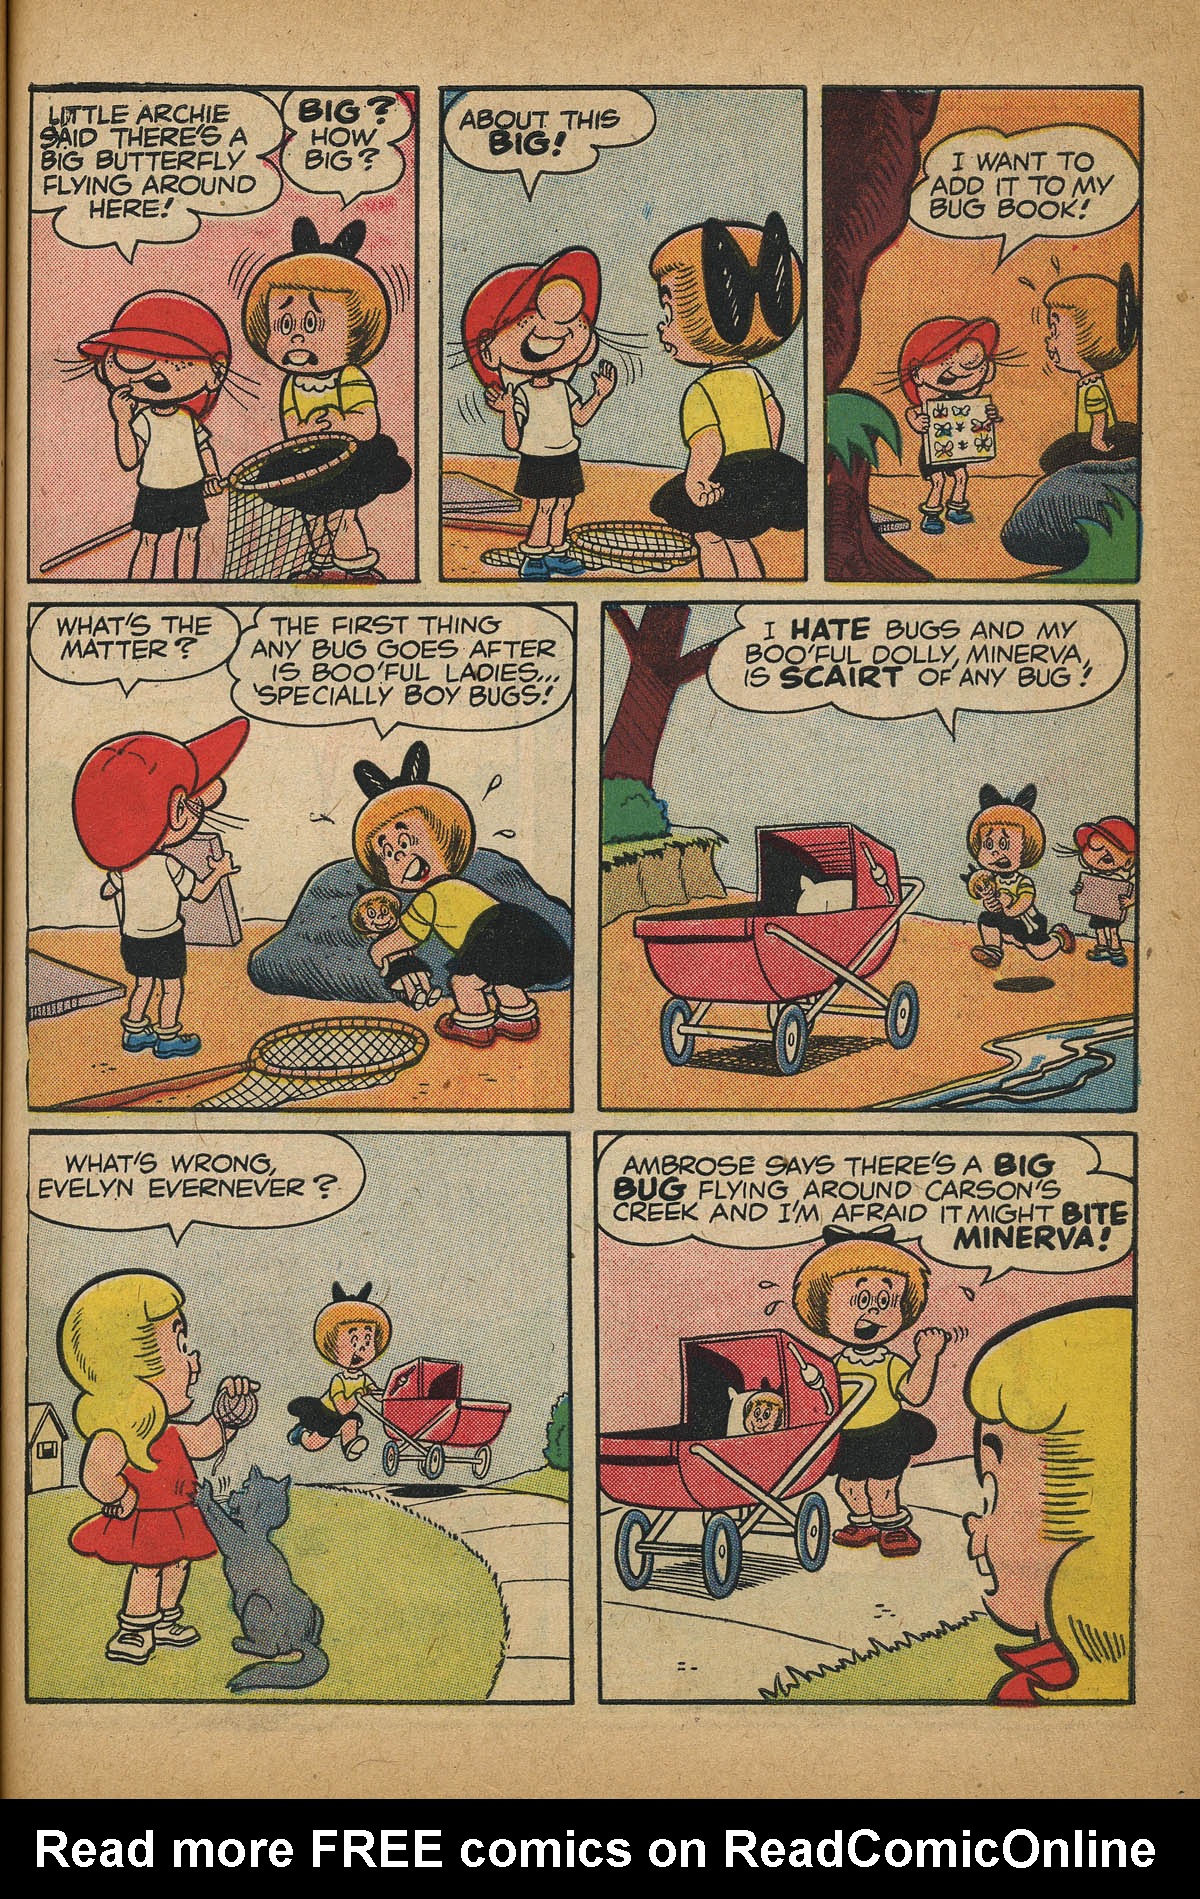 Read online The Adventures of Little Archie comic -  Issue #15 - 45